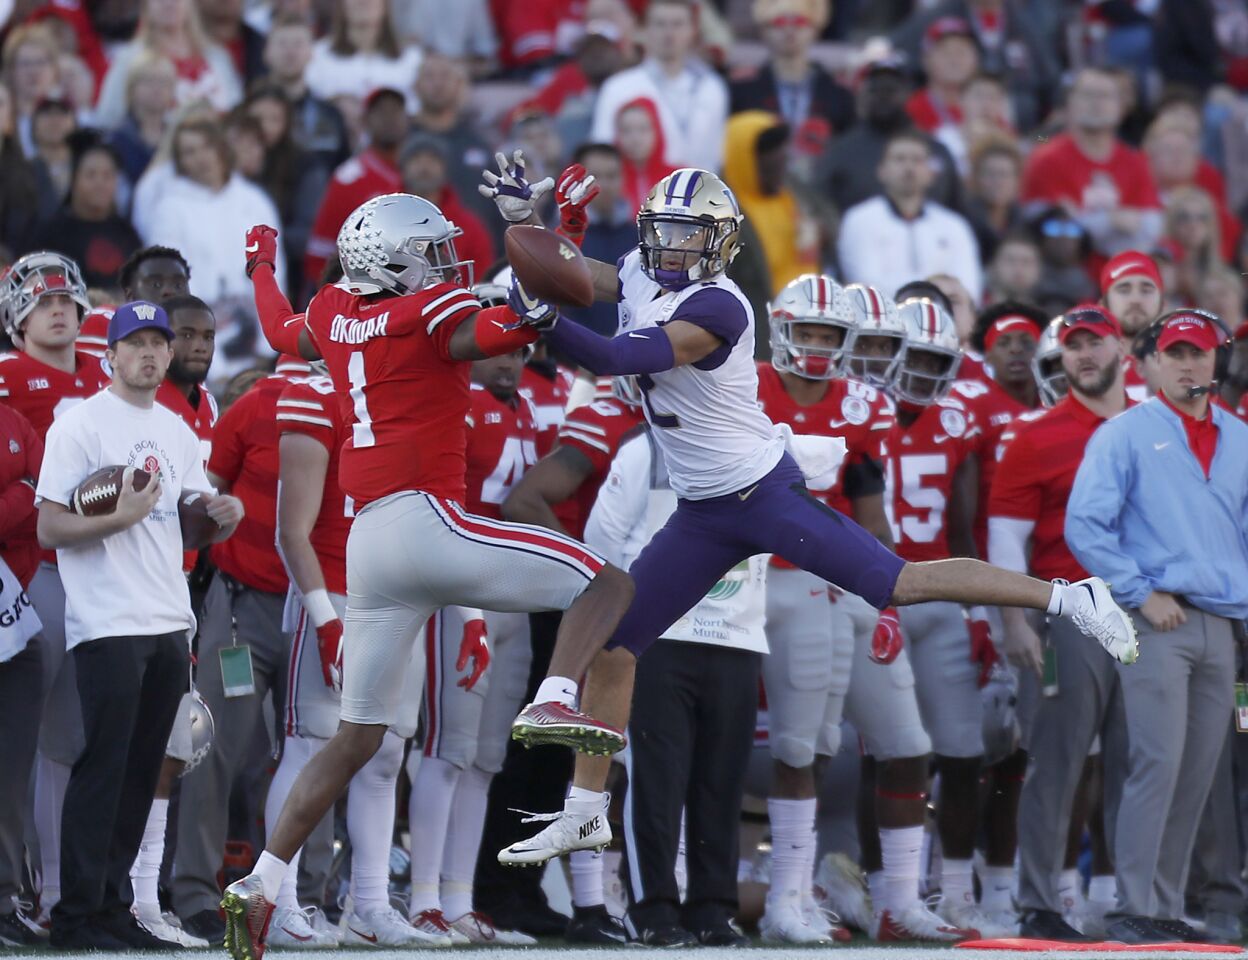 Ohio State cornerback Jeffrey Okudah breaks up a pass intended for Washington reciever Aaron Fuller in the second quarter on Jan. 1 at the Rose Bowl.